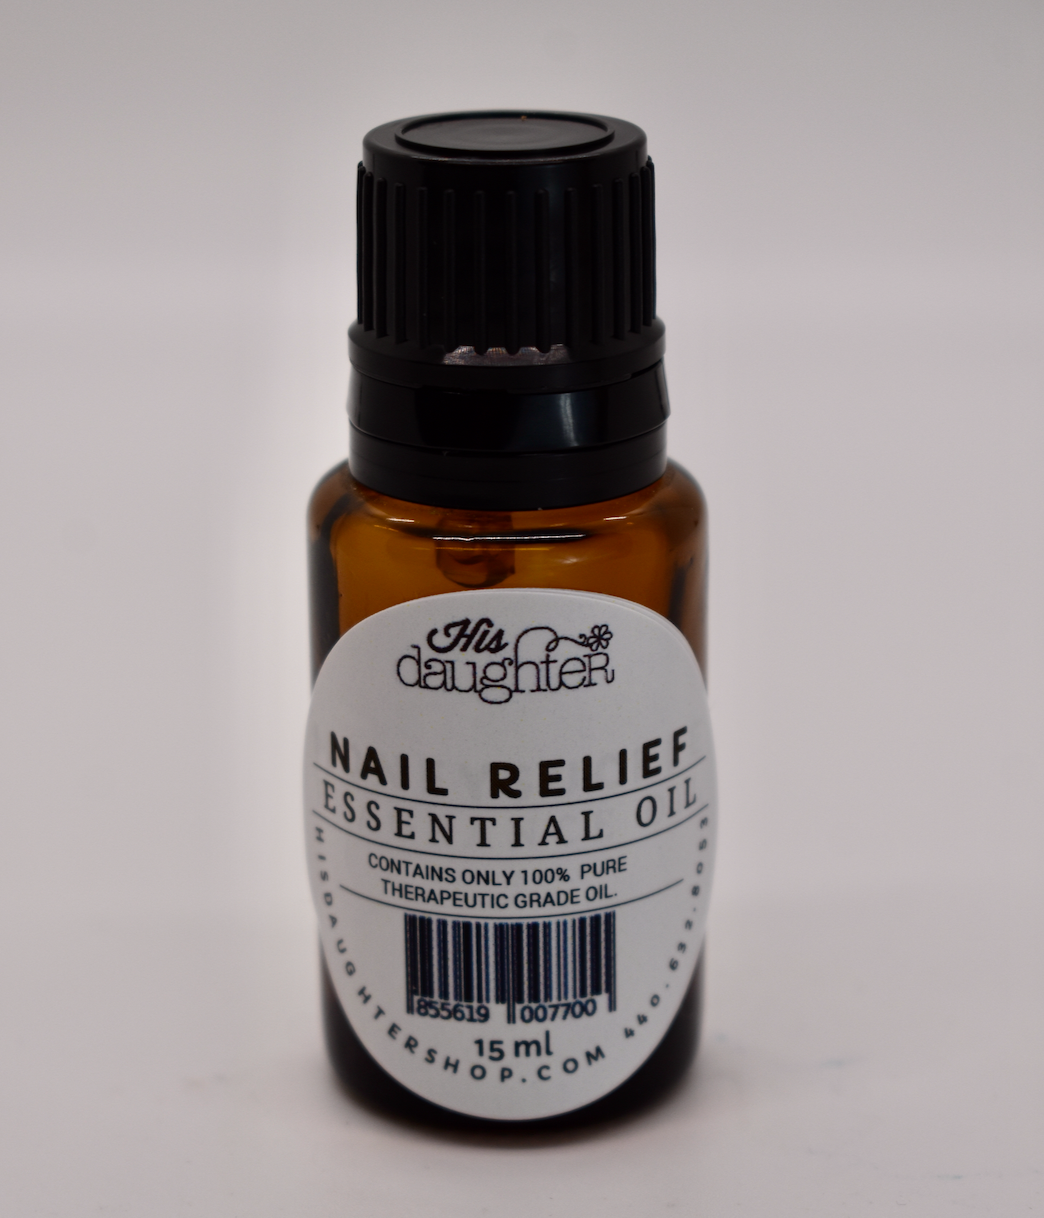 Nail Relief Essential Oil